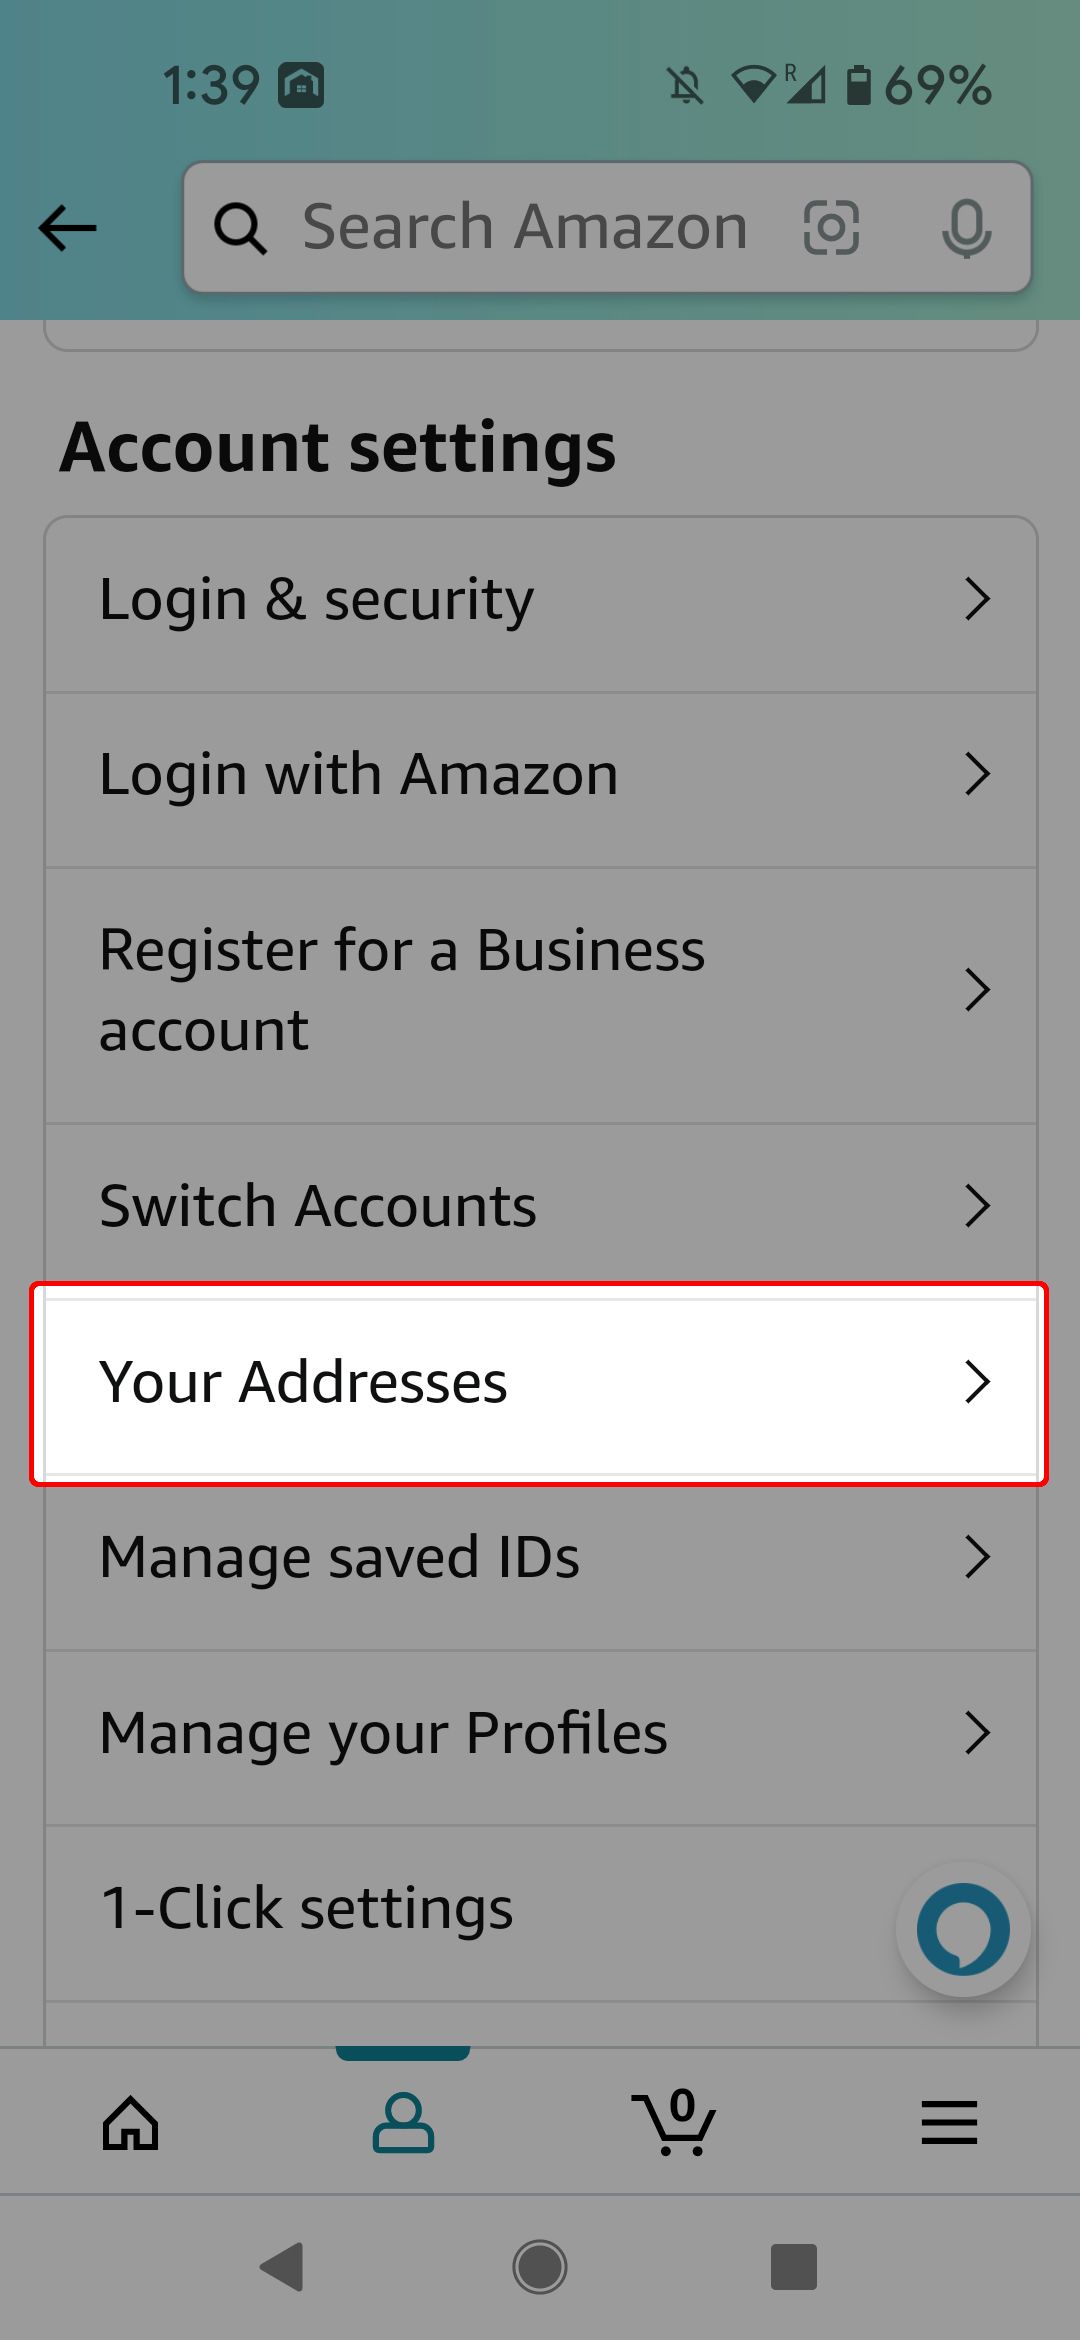 Scroll down to the Amazon Account settings section and tap Your Addresses